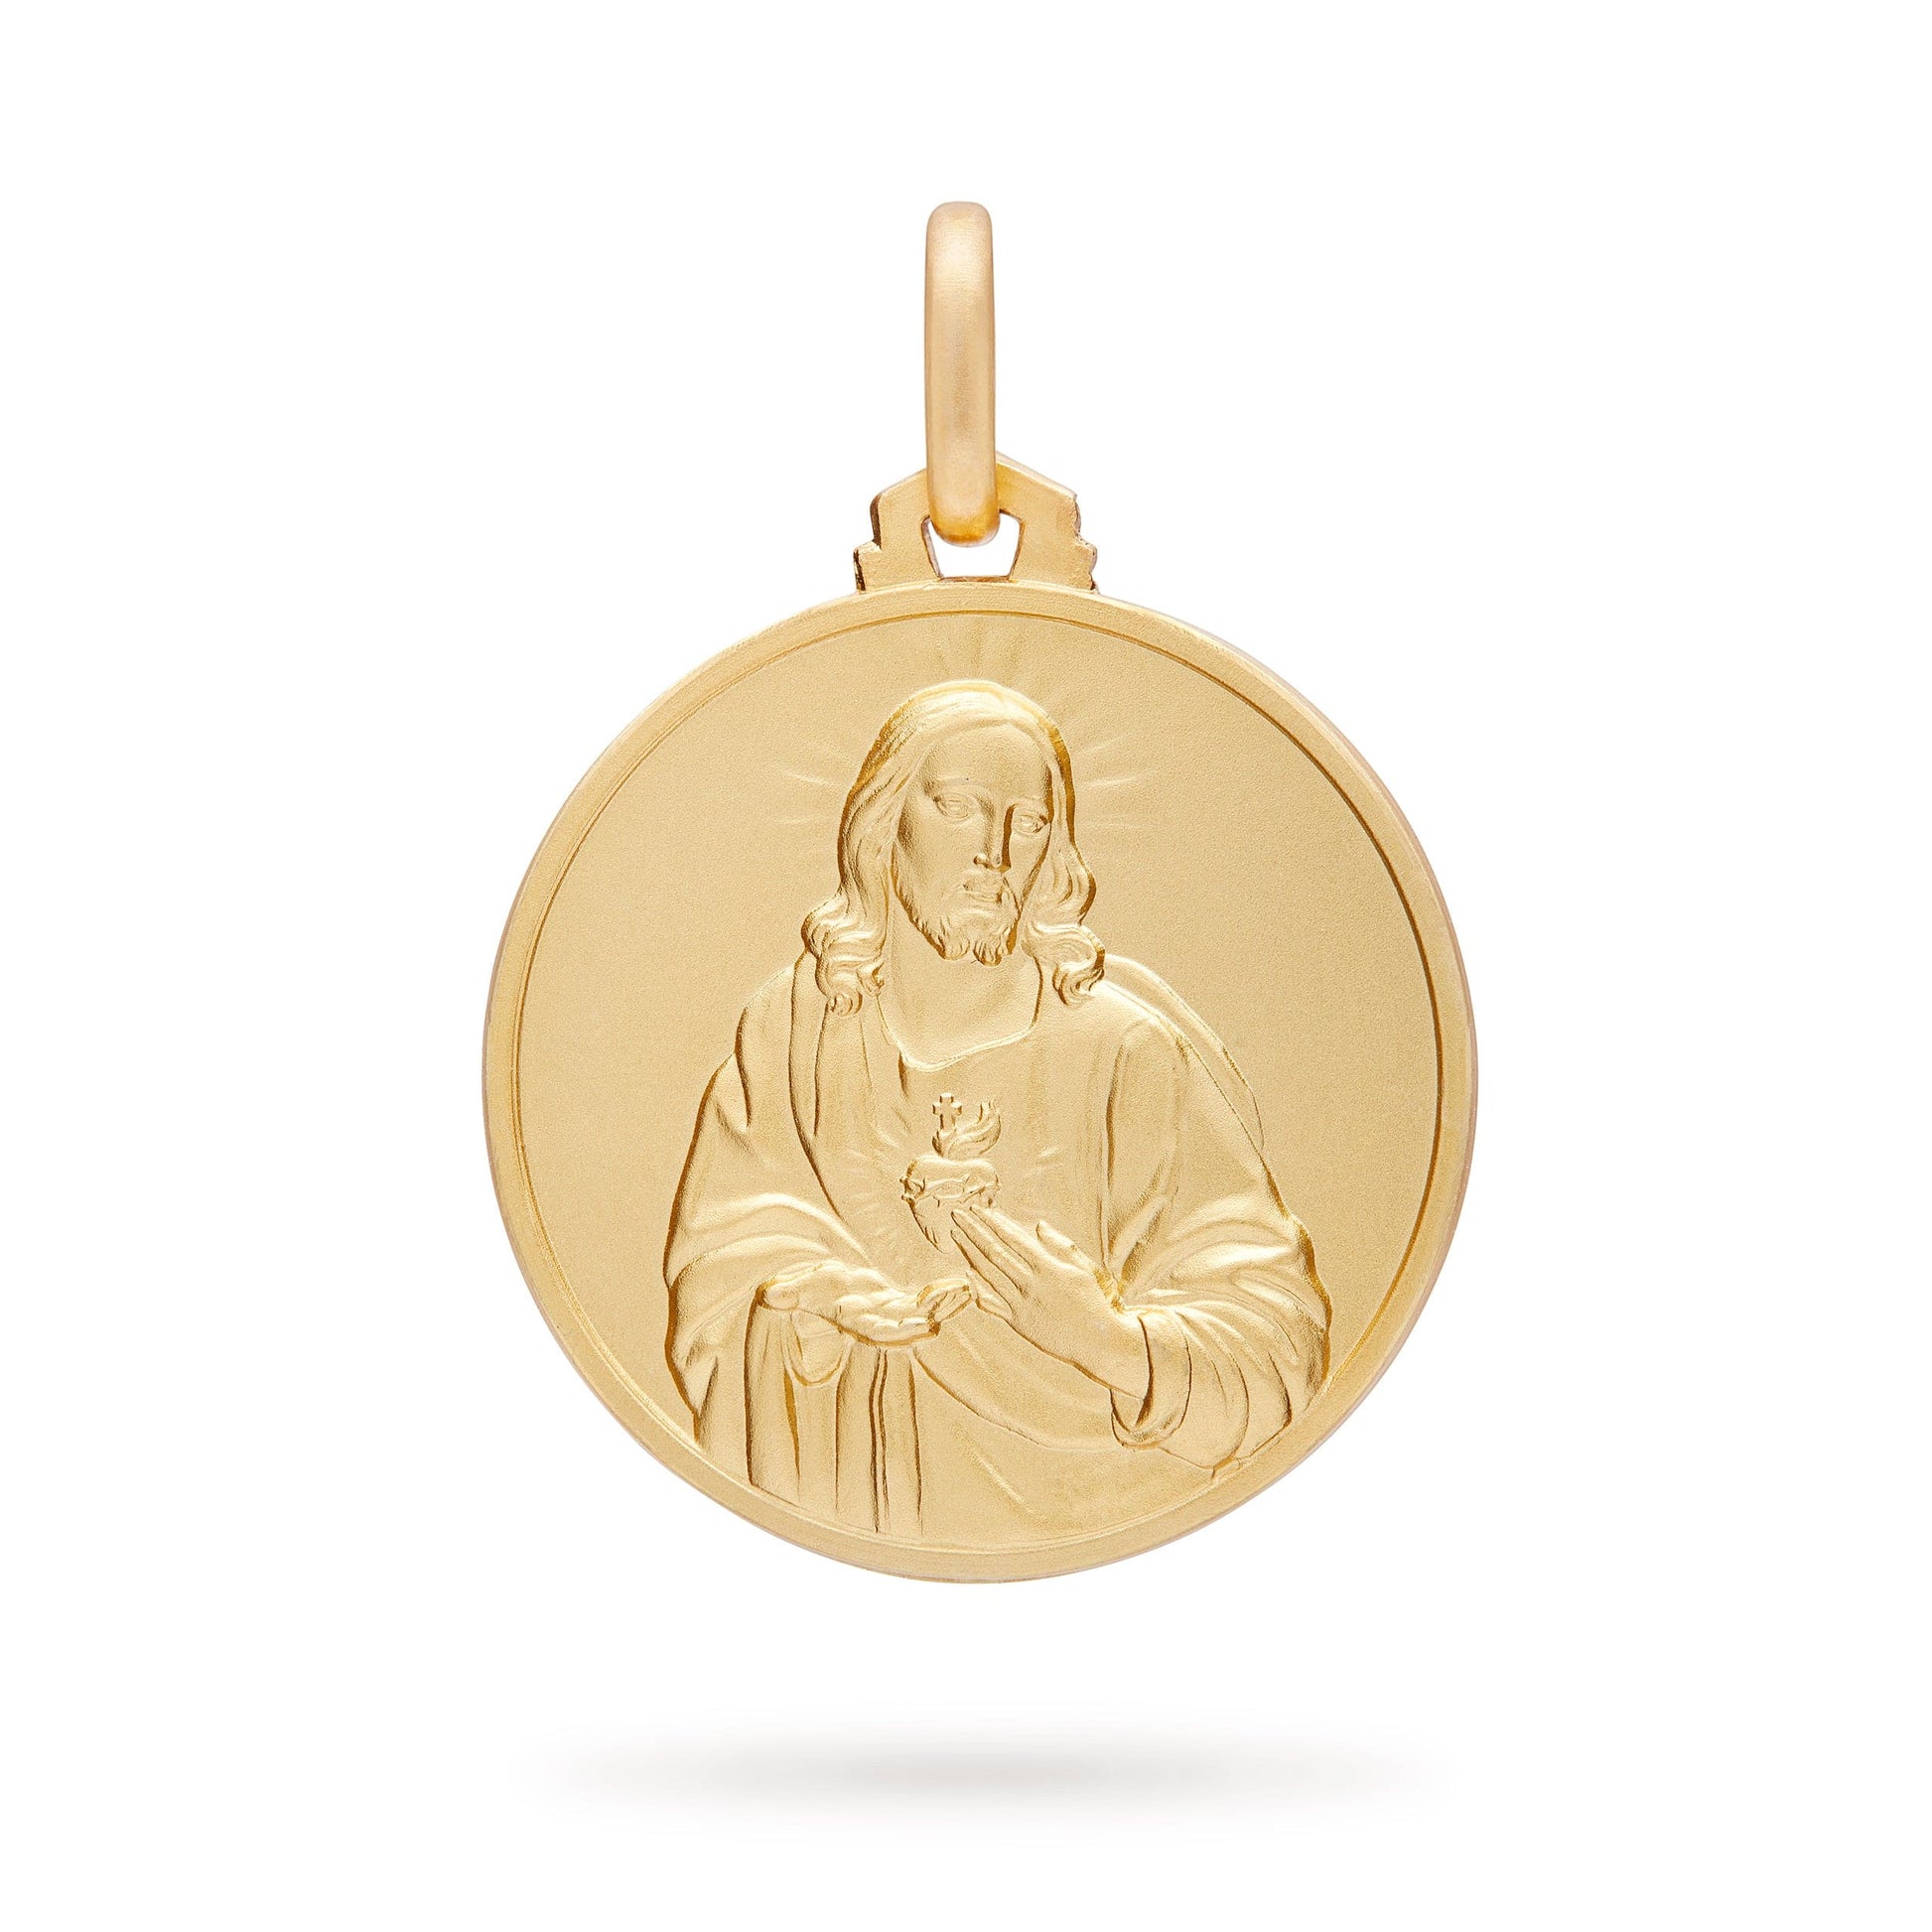 MONDO CATTOLICO Jewelry Round Scapular Gold Medal